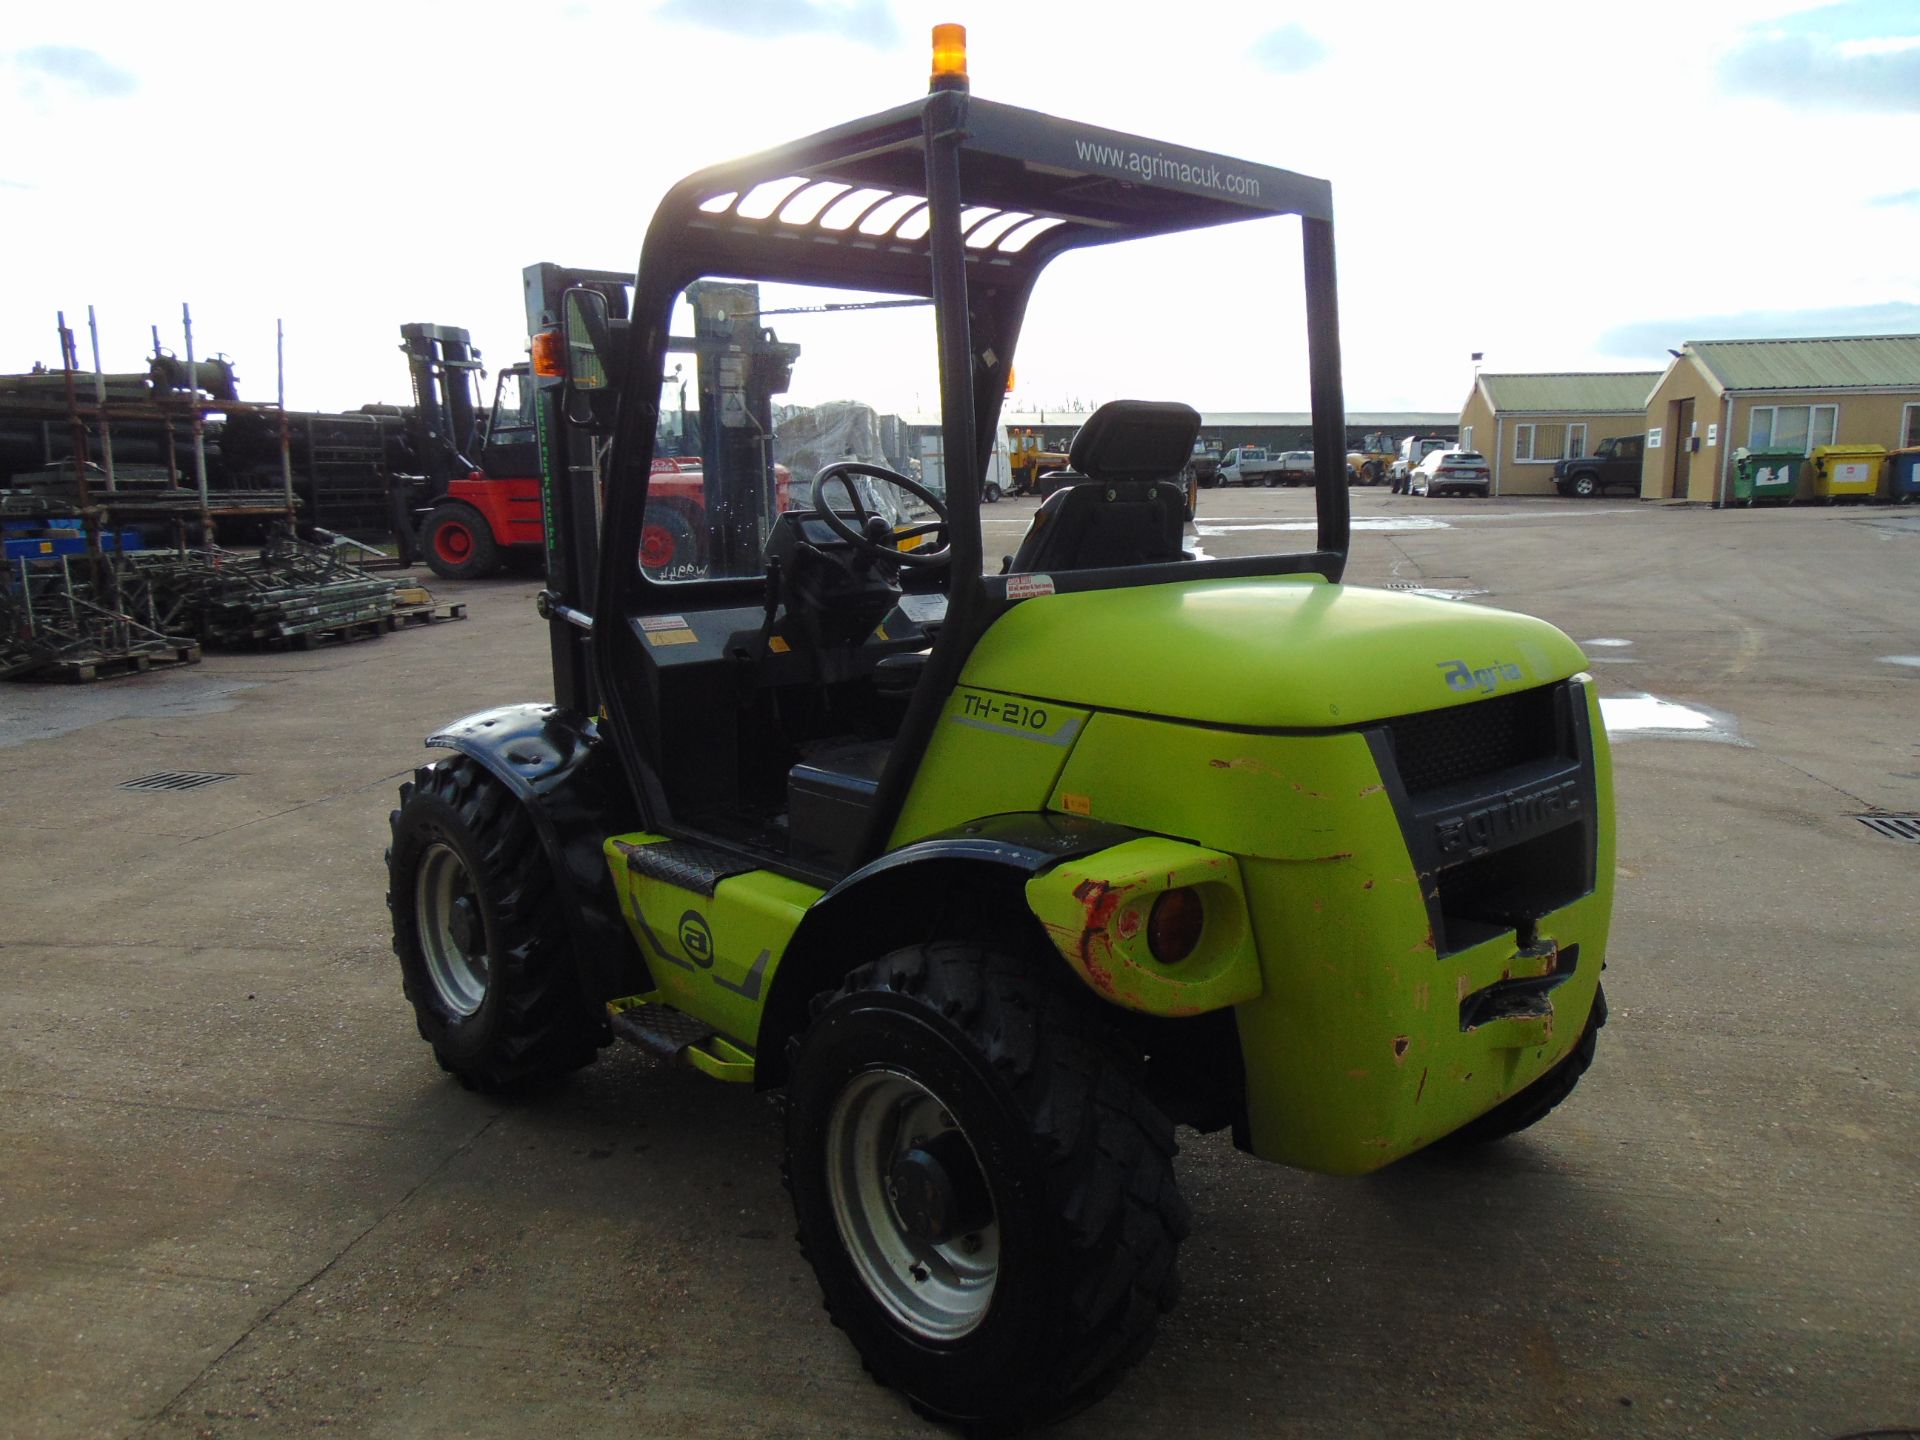 2011 Agrimac Agria TH210 Rough Terrain Diesel Forklift ONLY 1,918 HOURS! - Image 6 of 29